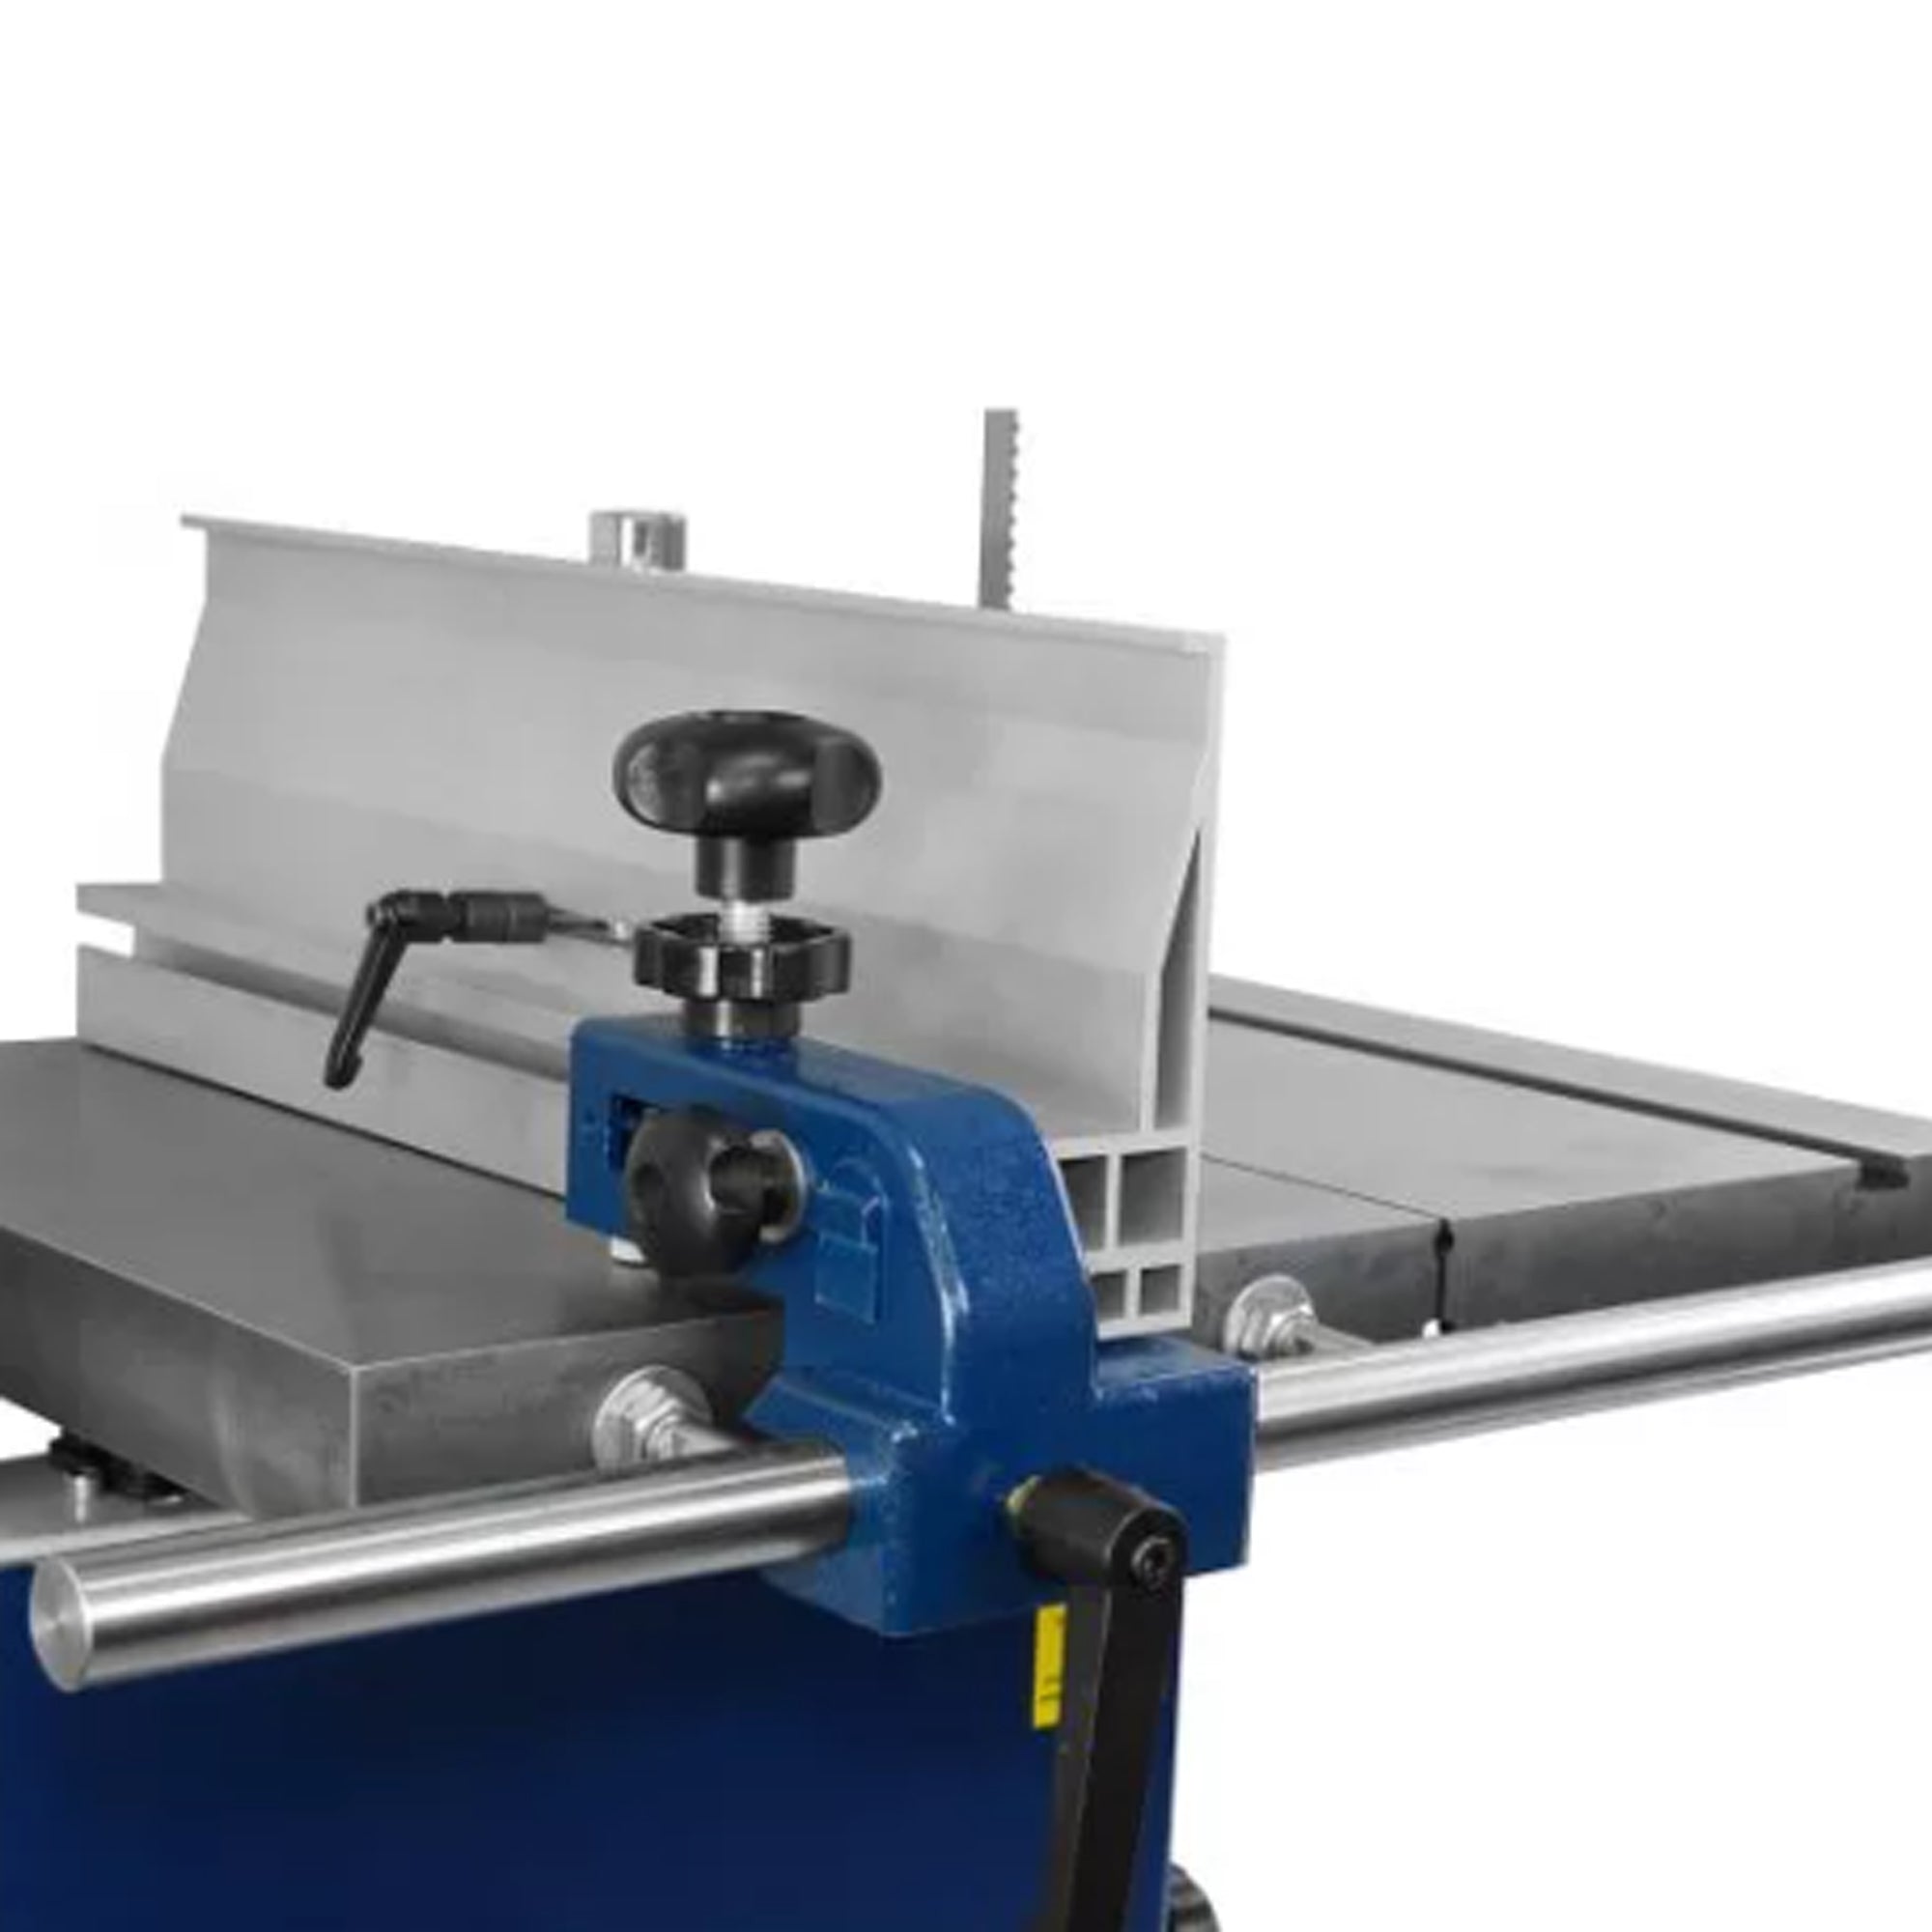 Quick Adjust 150mm (6") Tall Rip Fence System 10-920 suit Bandsaws by Rikon